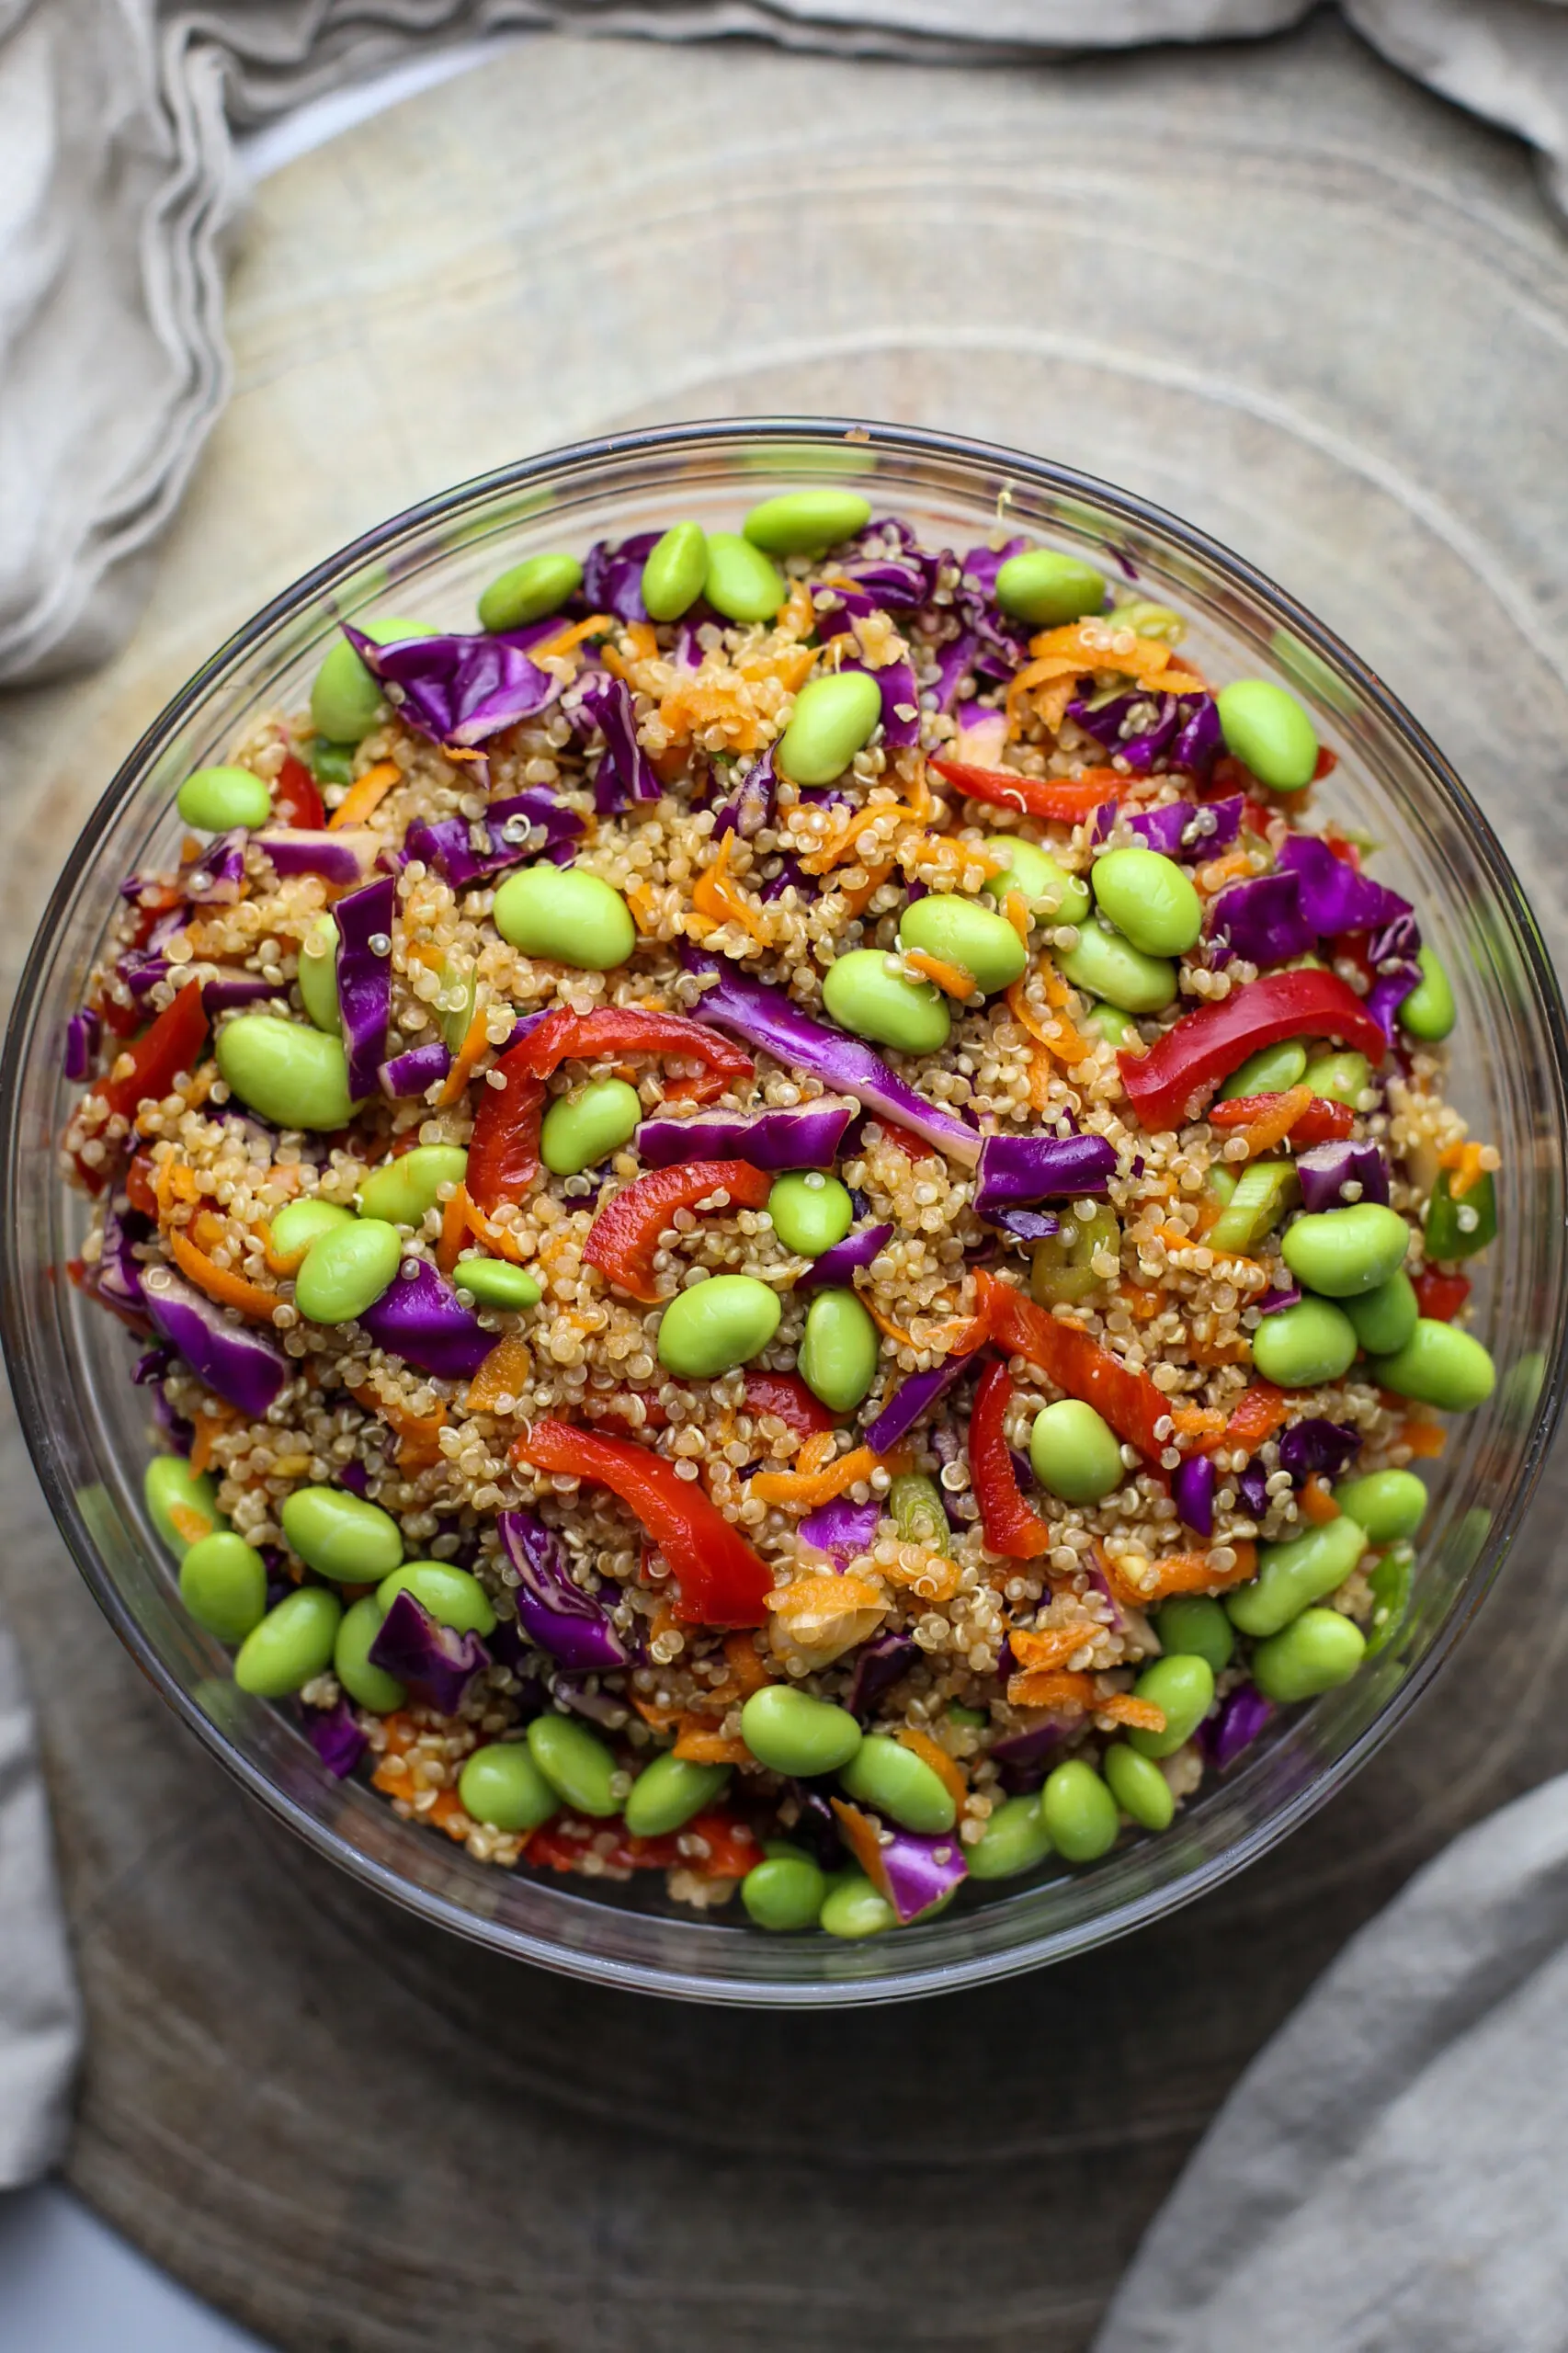 Quinoa edamame salad with peppers, cabbage, and carrots in a large glass bowl.